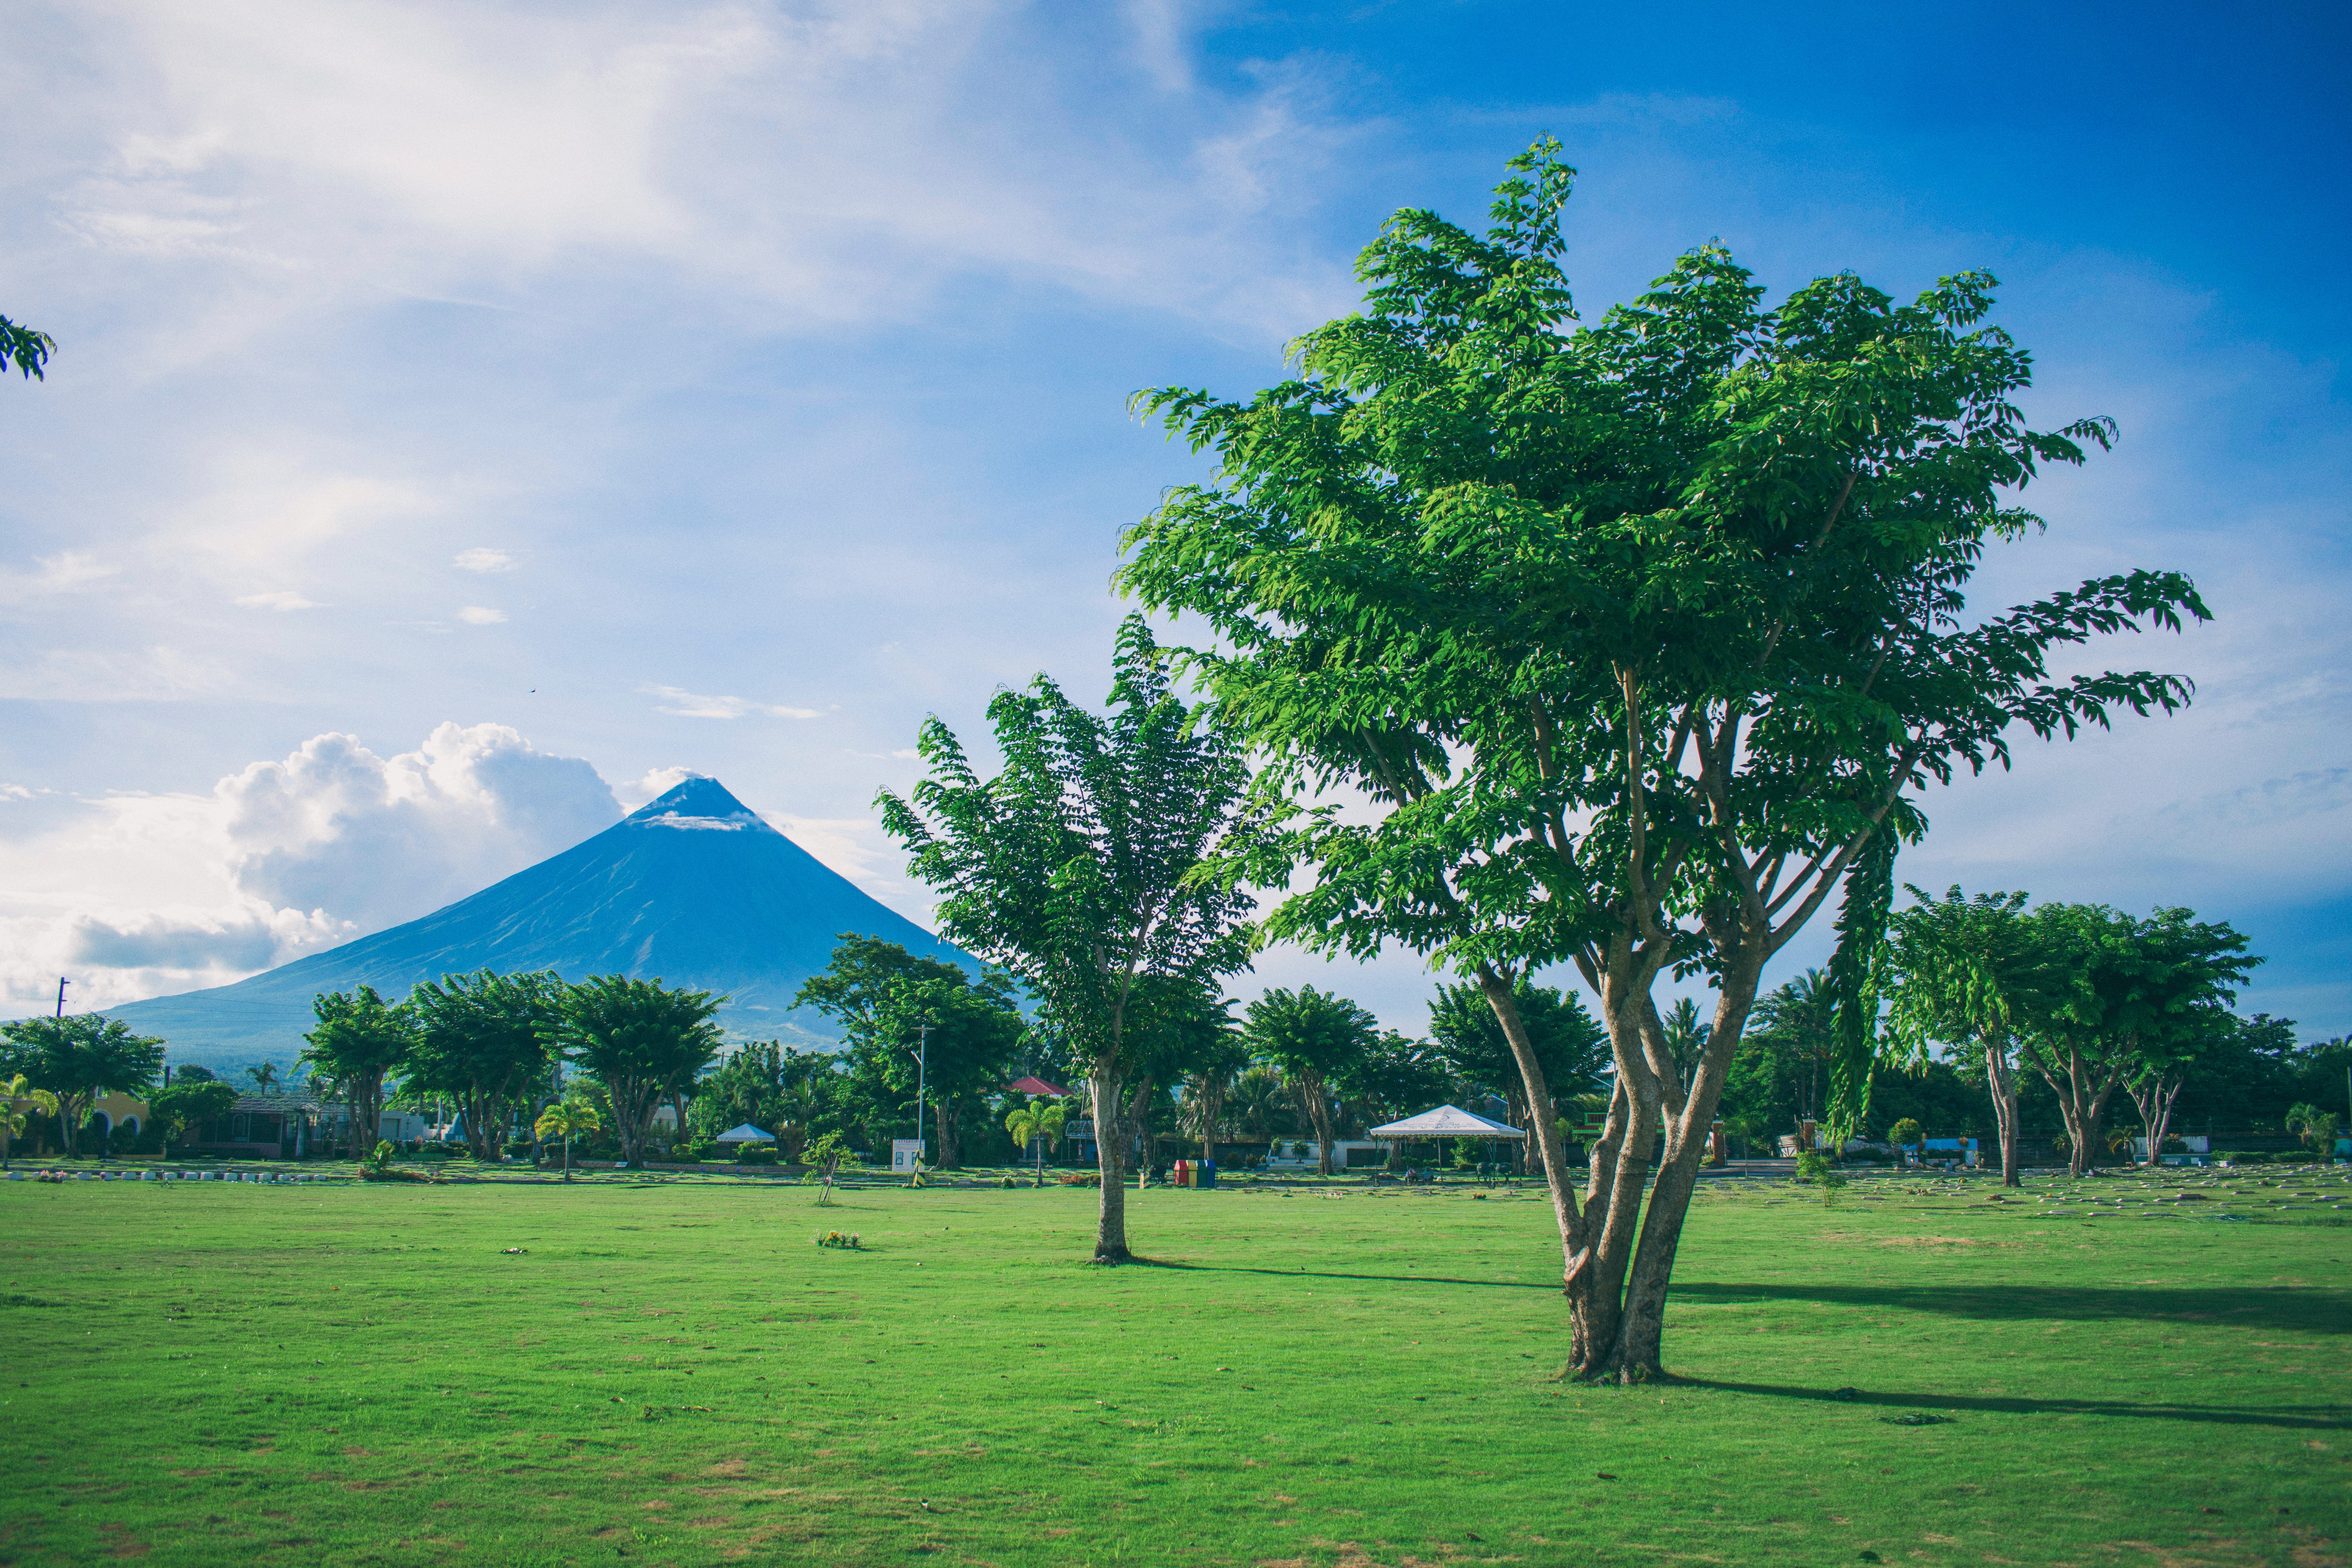 Landscape Photography of Open Field With Tree With Mayon Volcano Background · Free